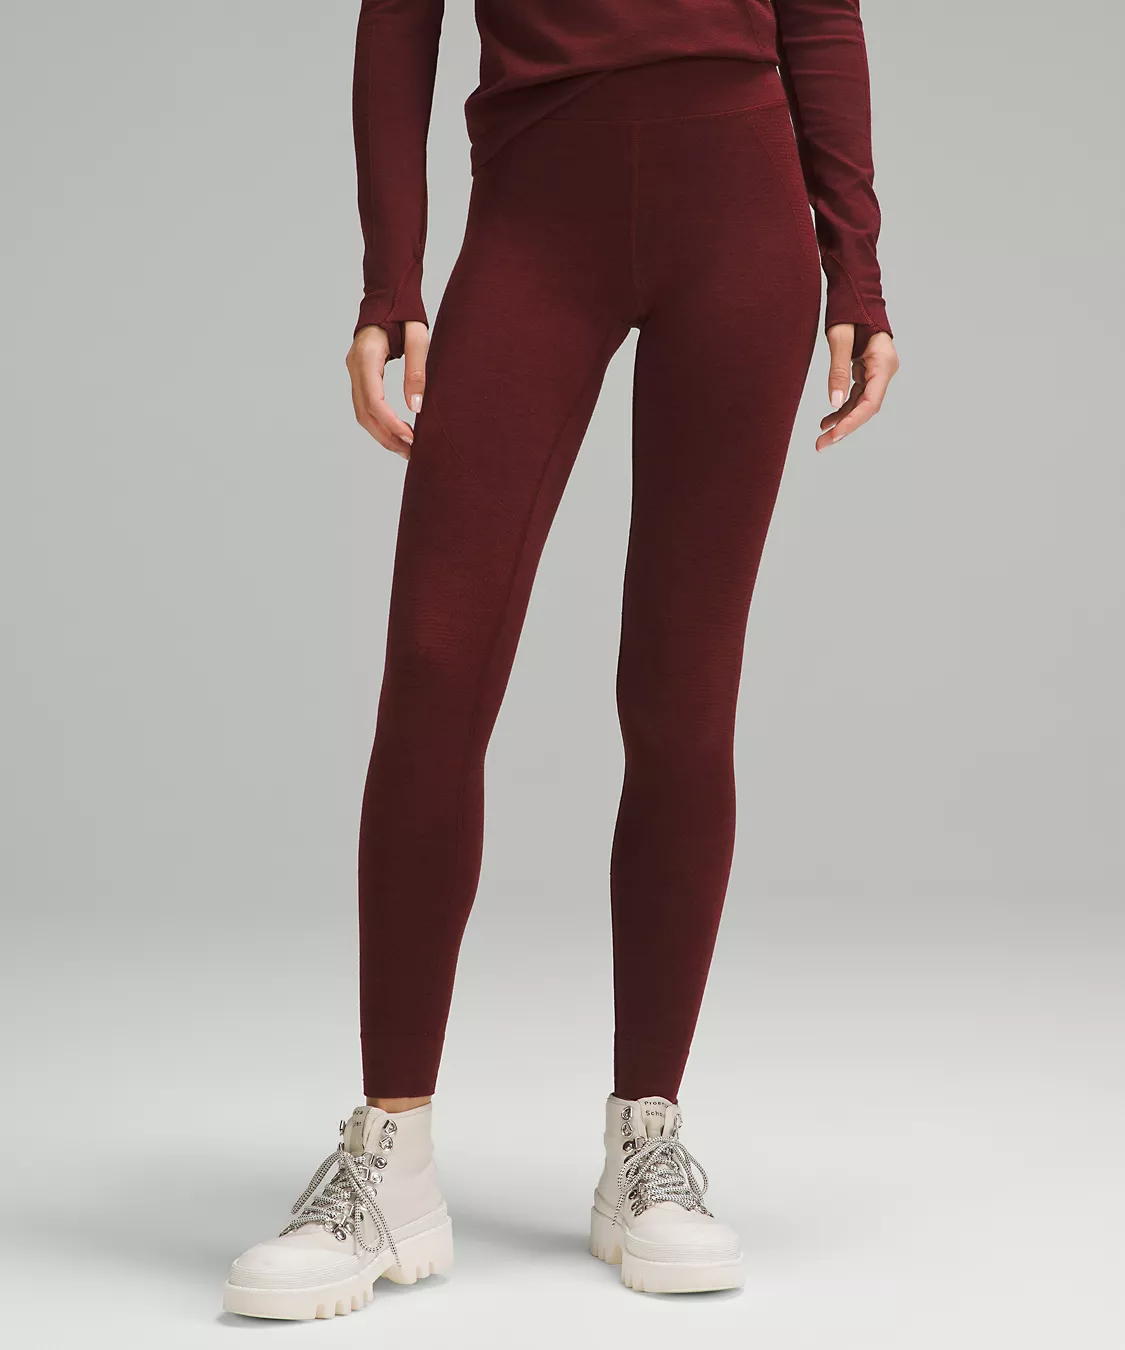 woman wearing merlot-colored wool leggings from lululemon with ivory hiking books